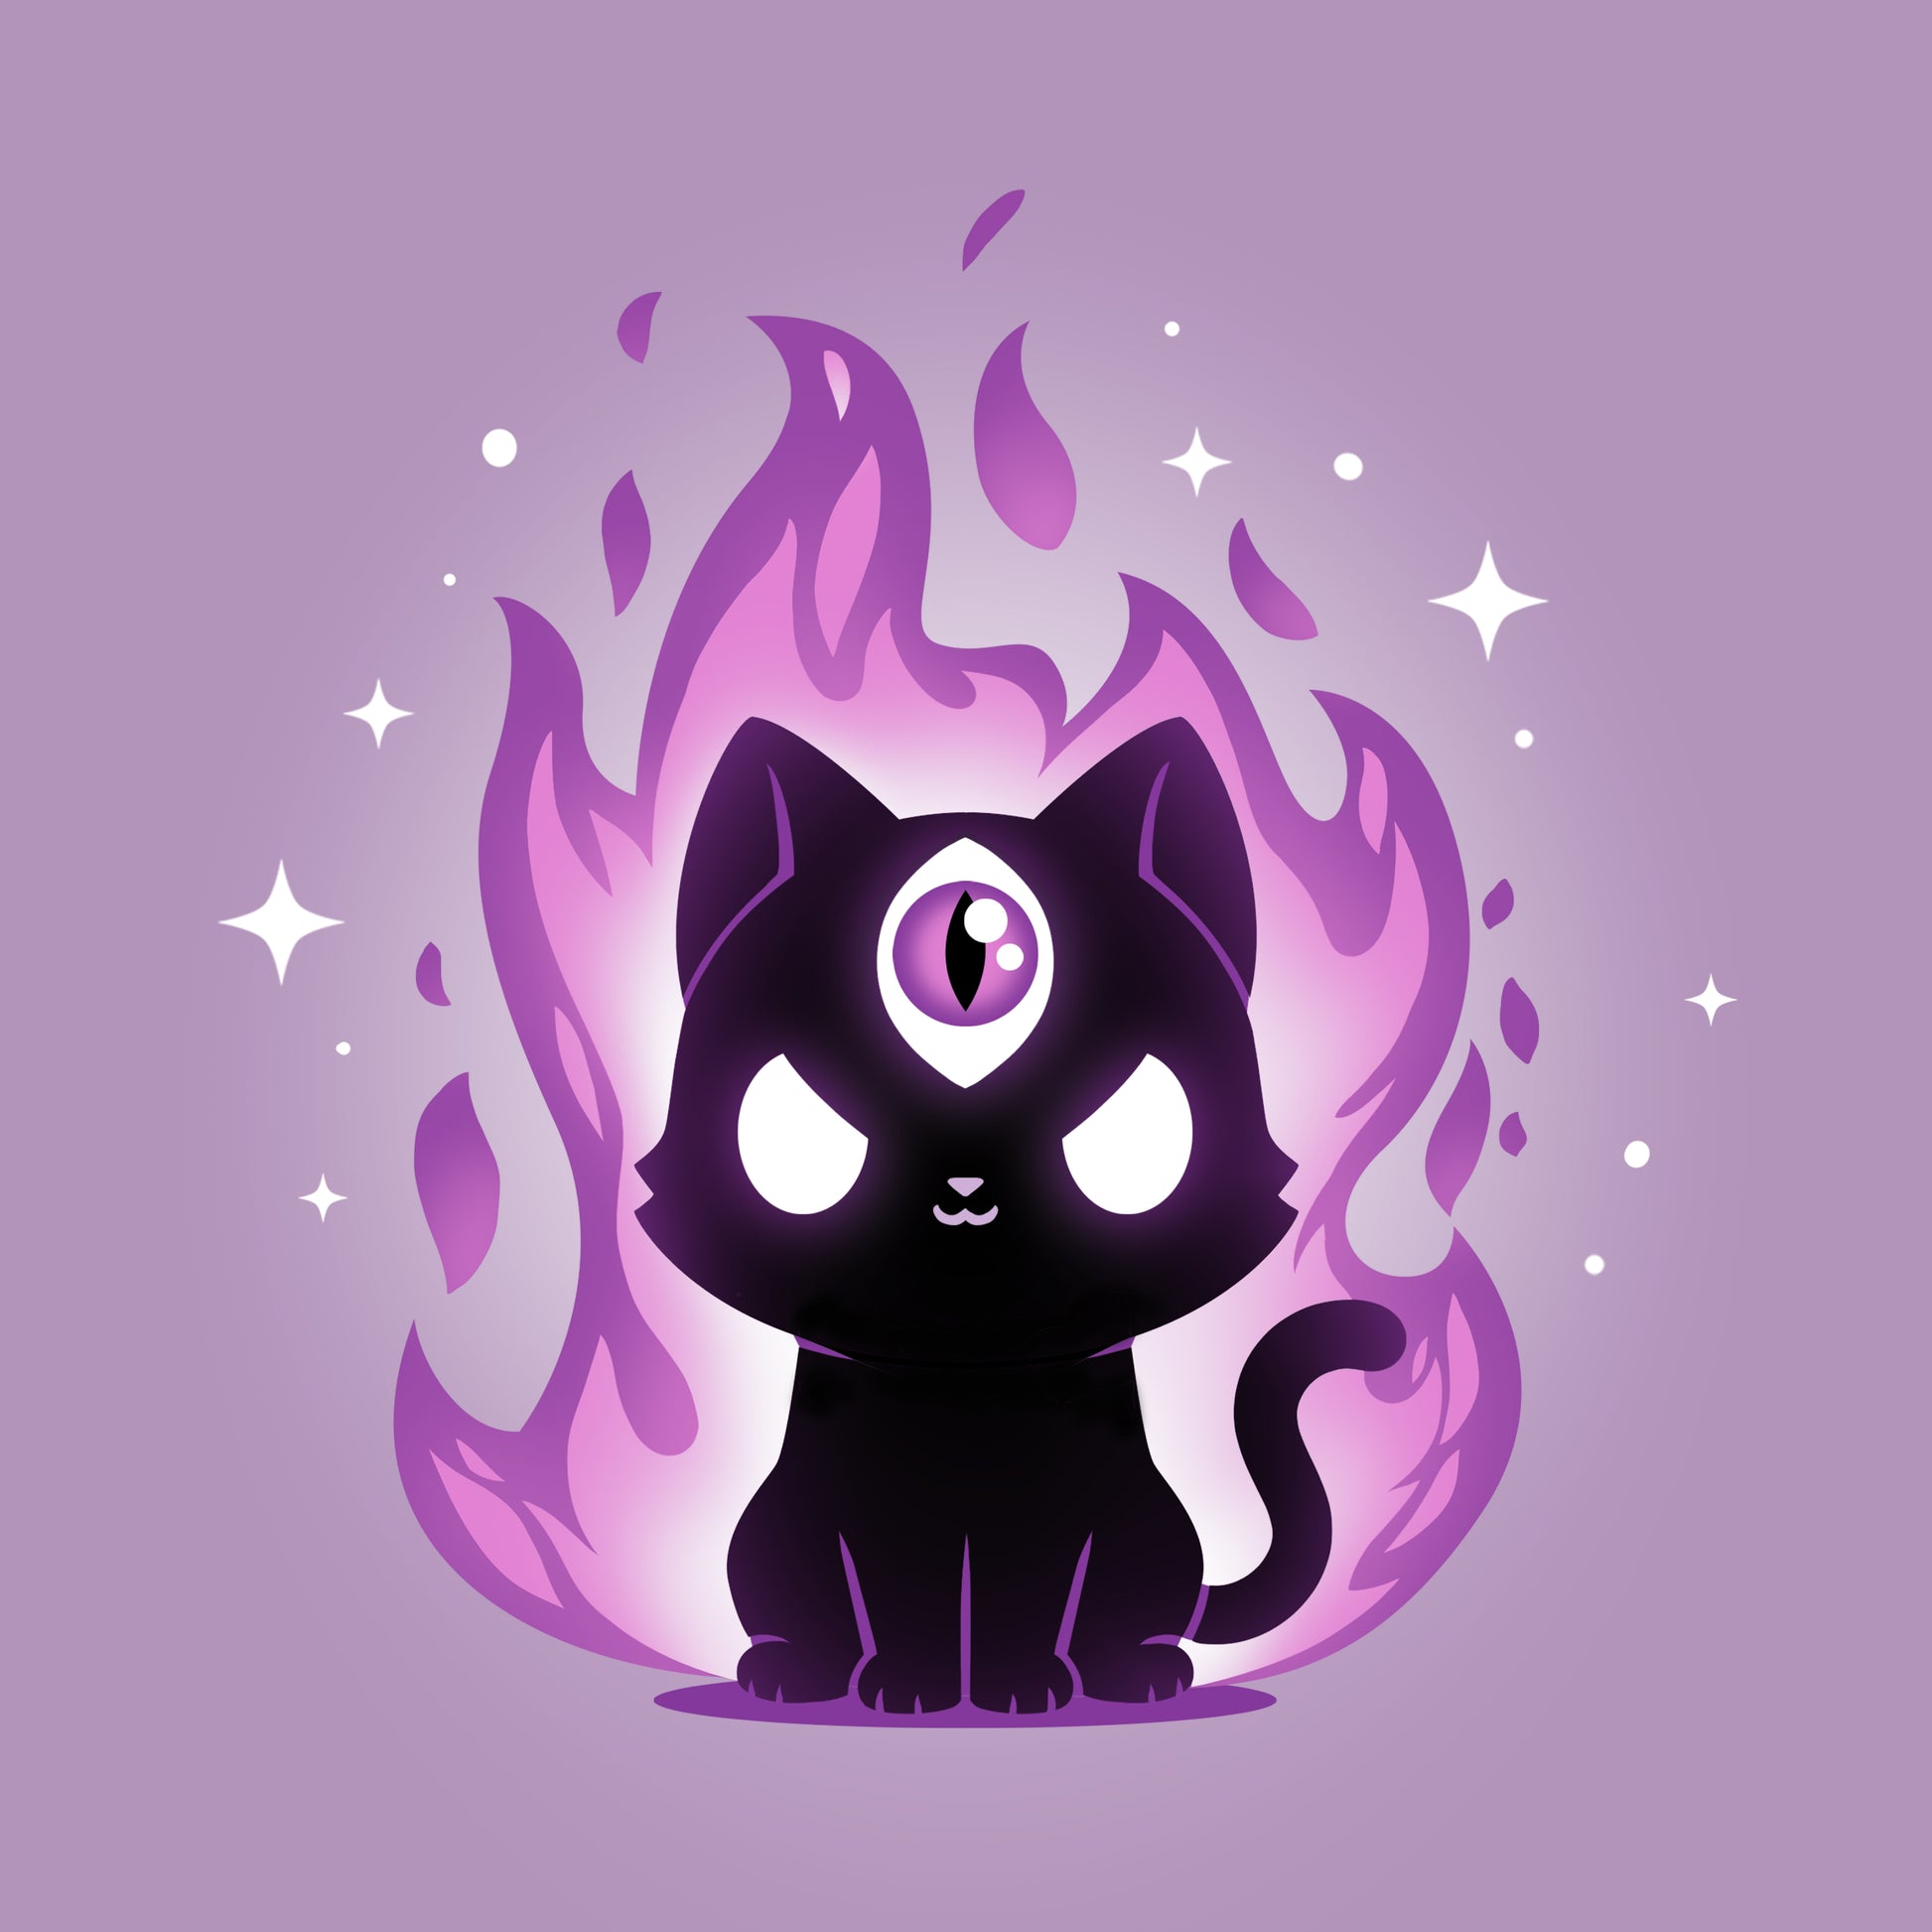 A TeeTurtle Mystic Meow cat sitting on a purple background.